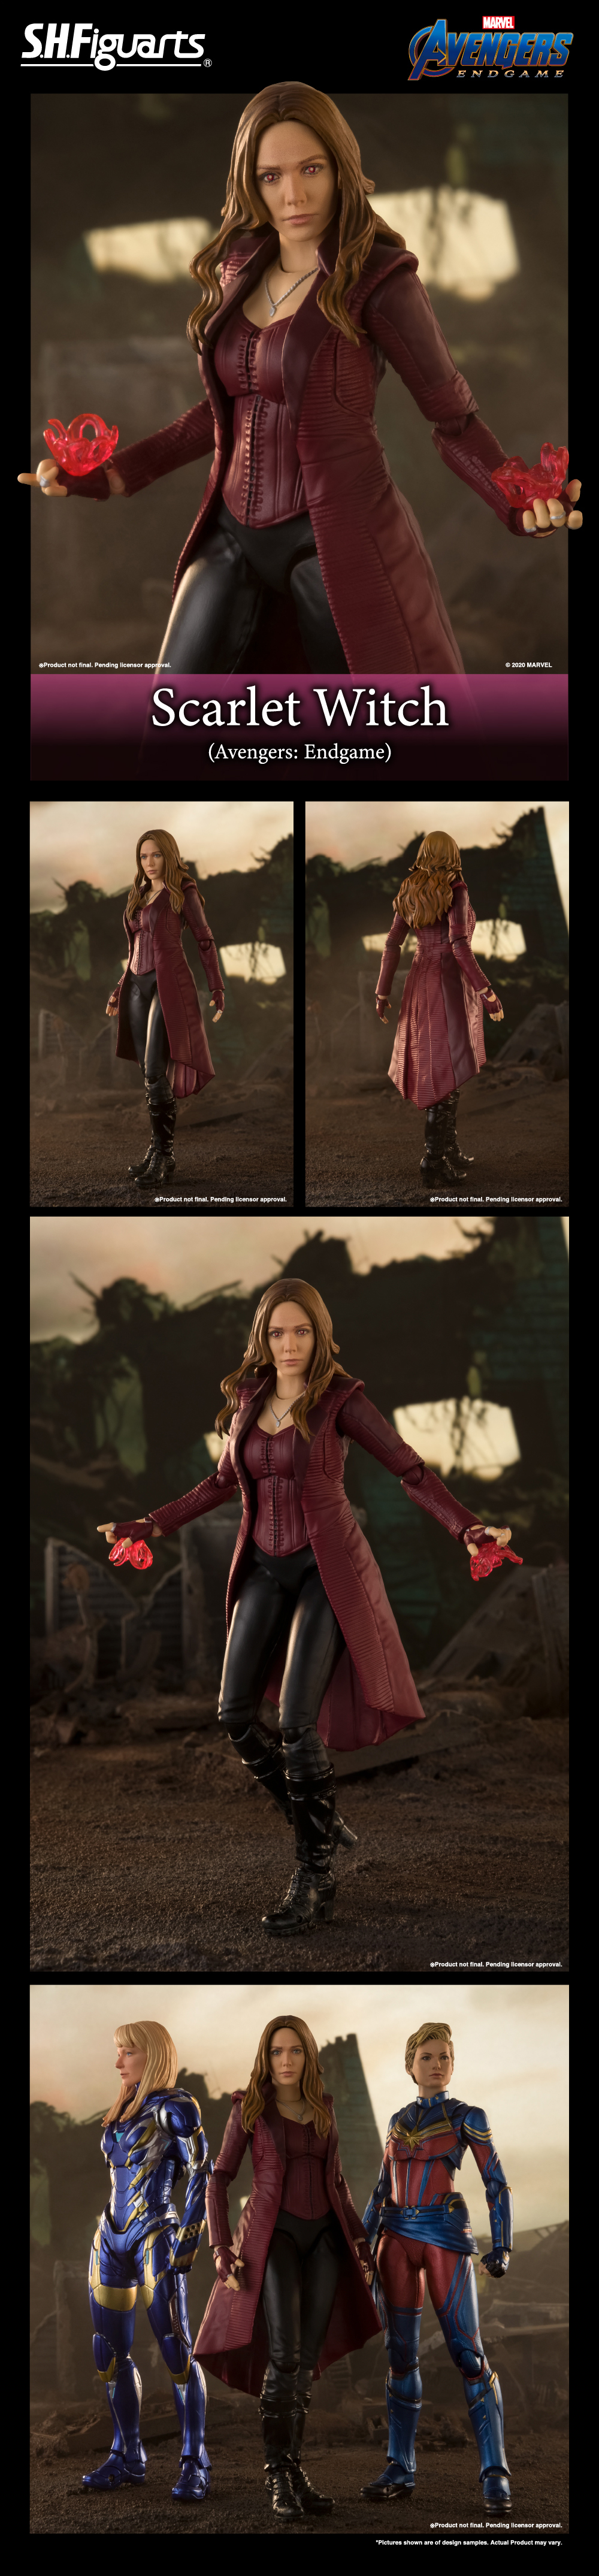 Japan version Avengers // End Game Bandai S.H.Figuarts Scarlet Witch